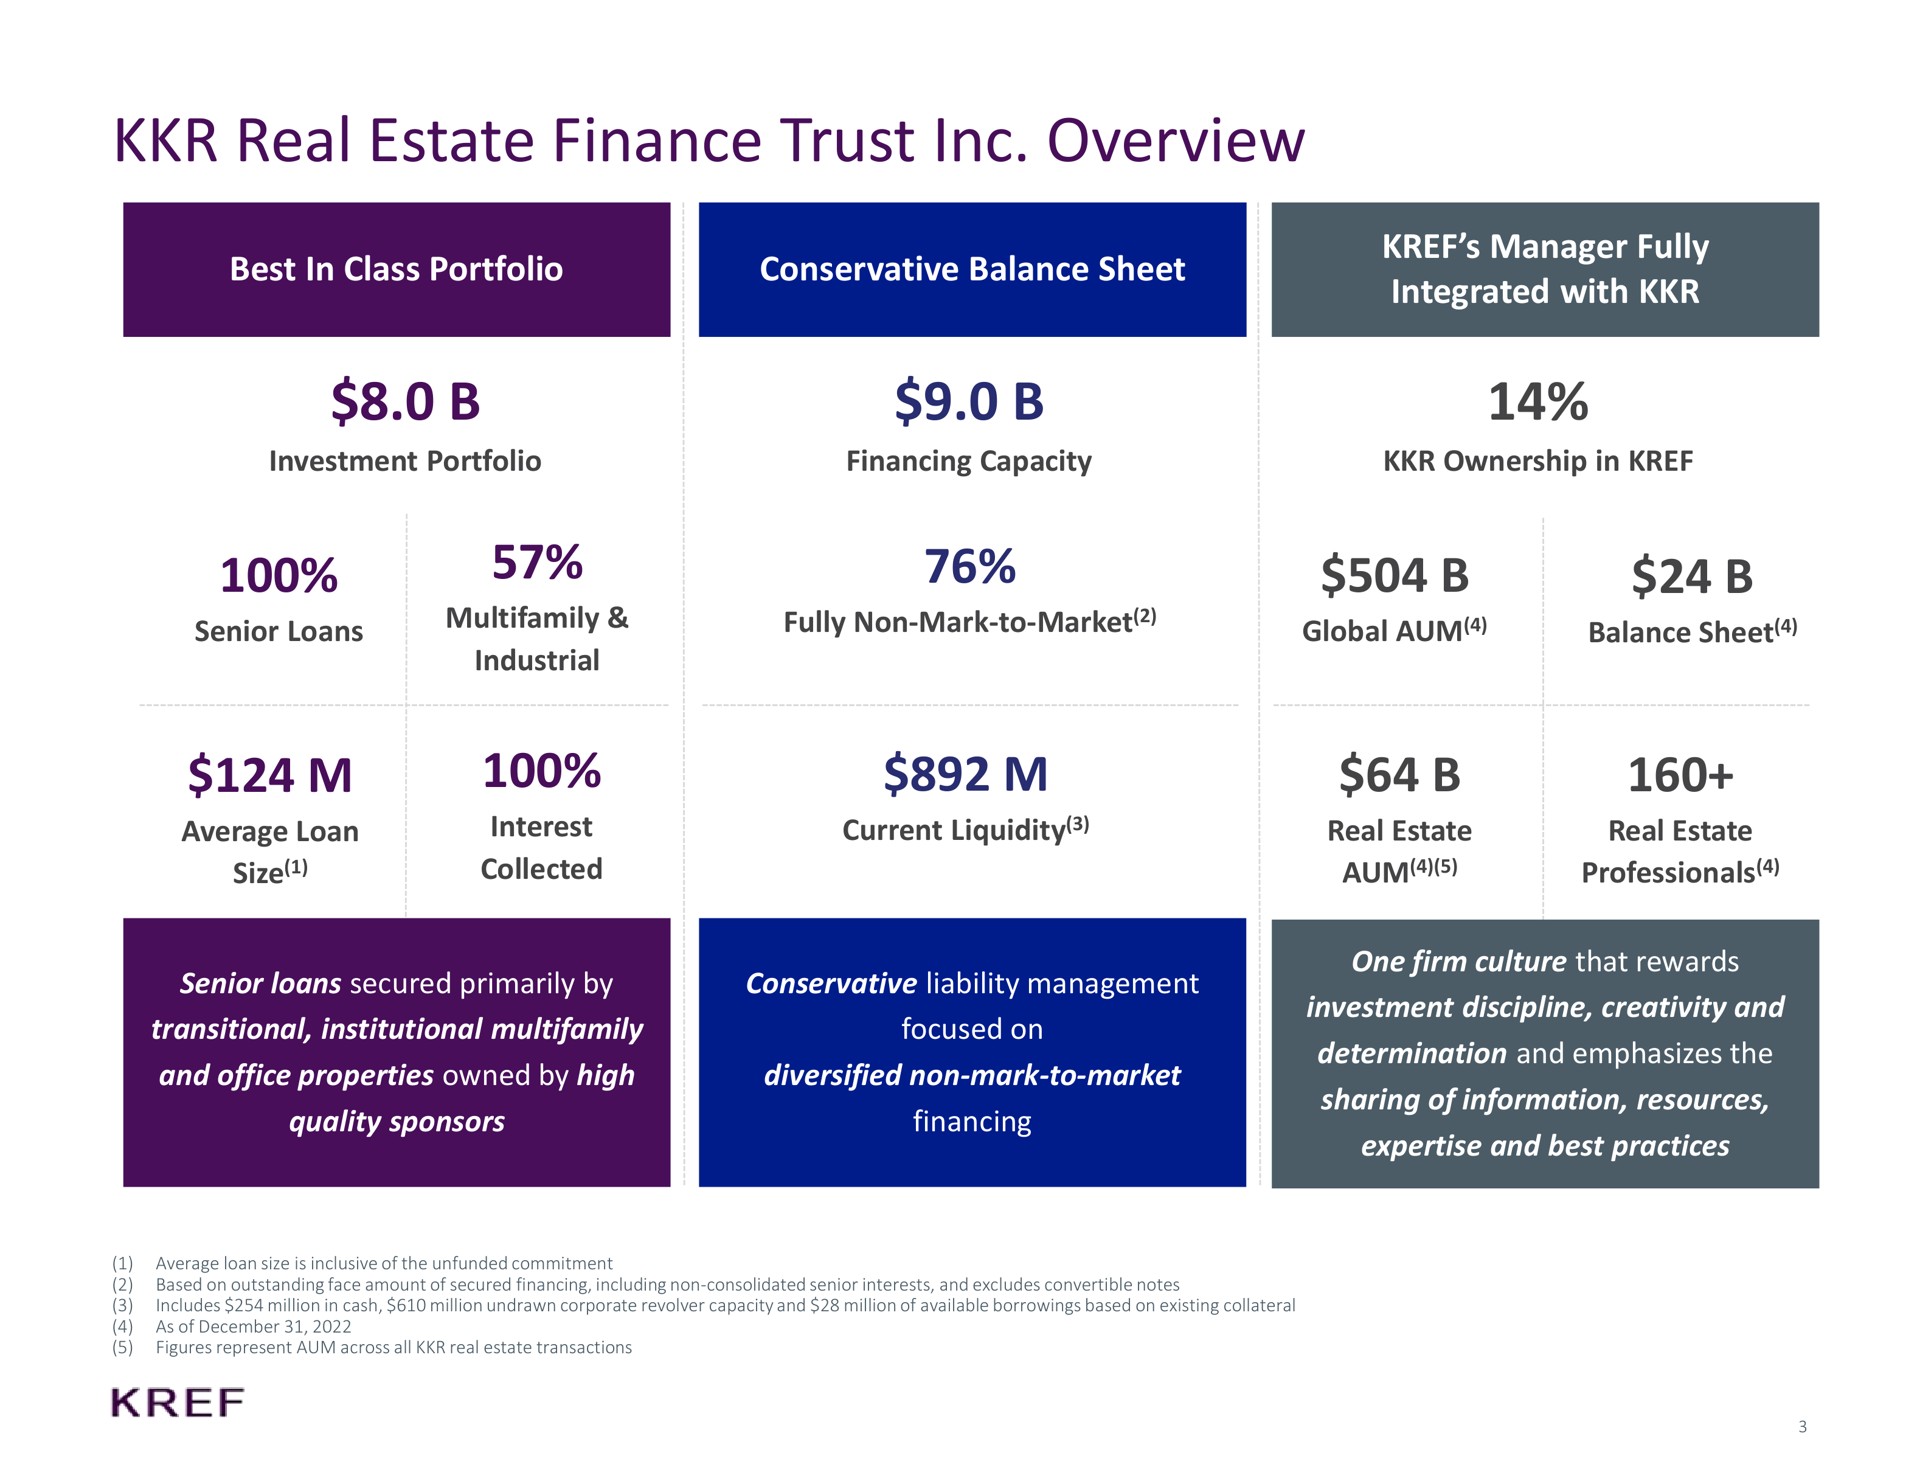 real estate finance trust overview best in class portfolio conservative balance sheet manager fully integrated with current liquidity | KKR Real Estate Finance Trust